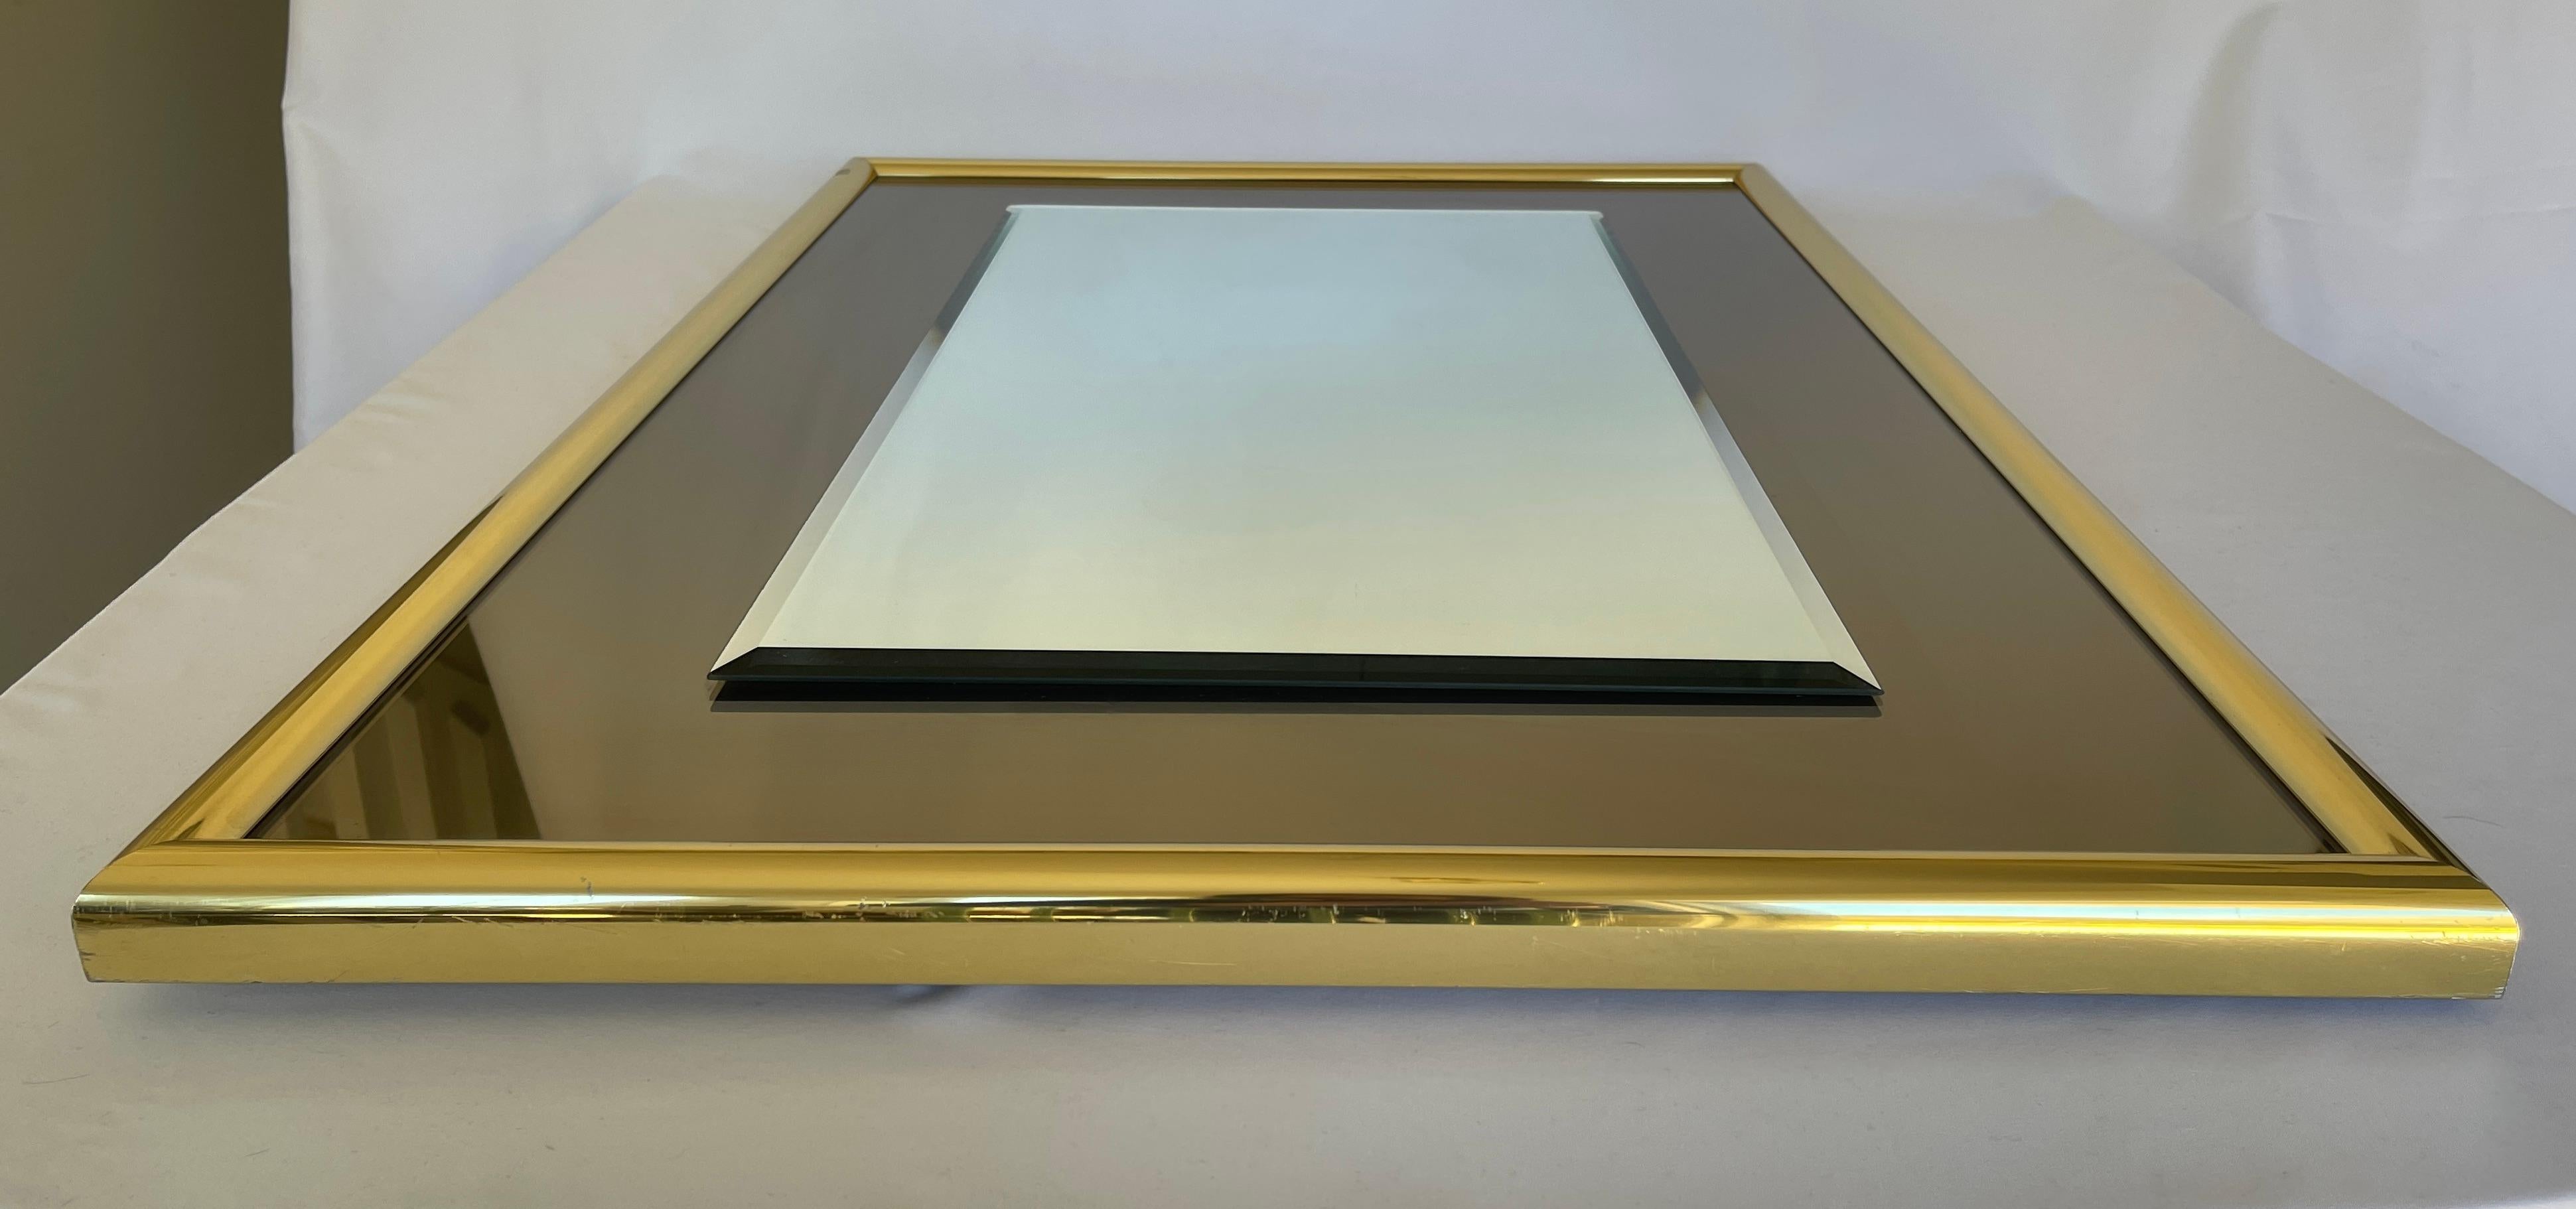 1970s rectangular mirror with smoke glass border and brass frame. 
May be hung vertically or horizontally.